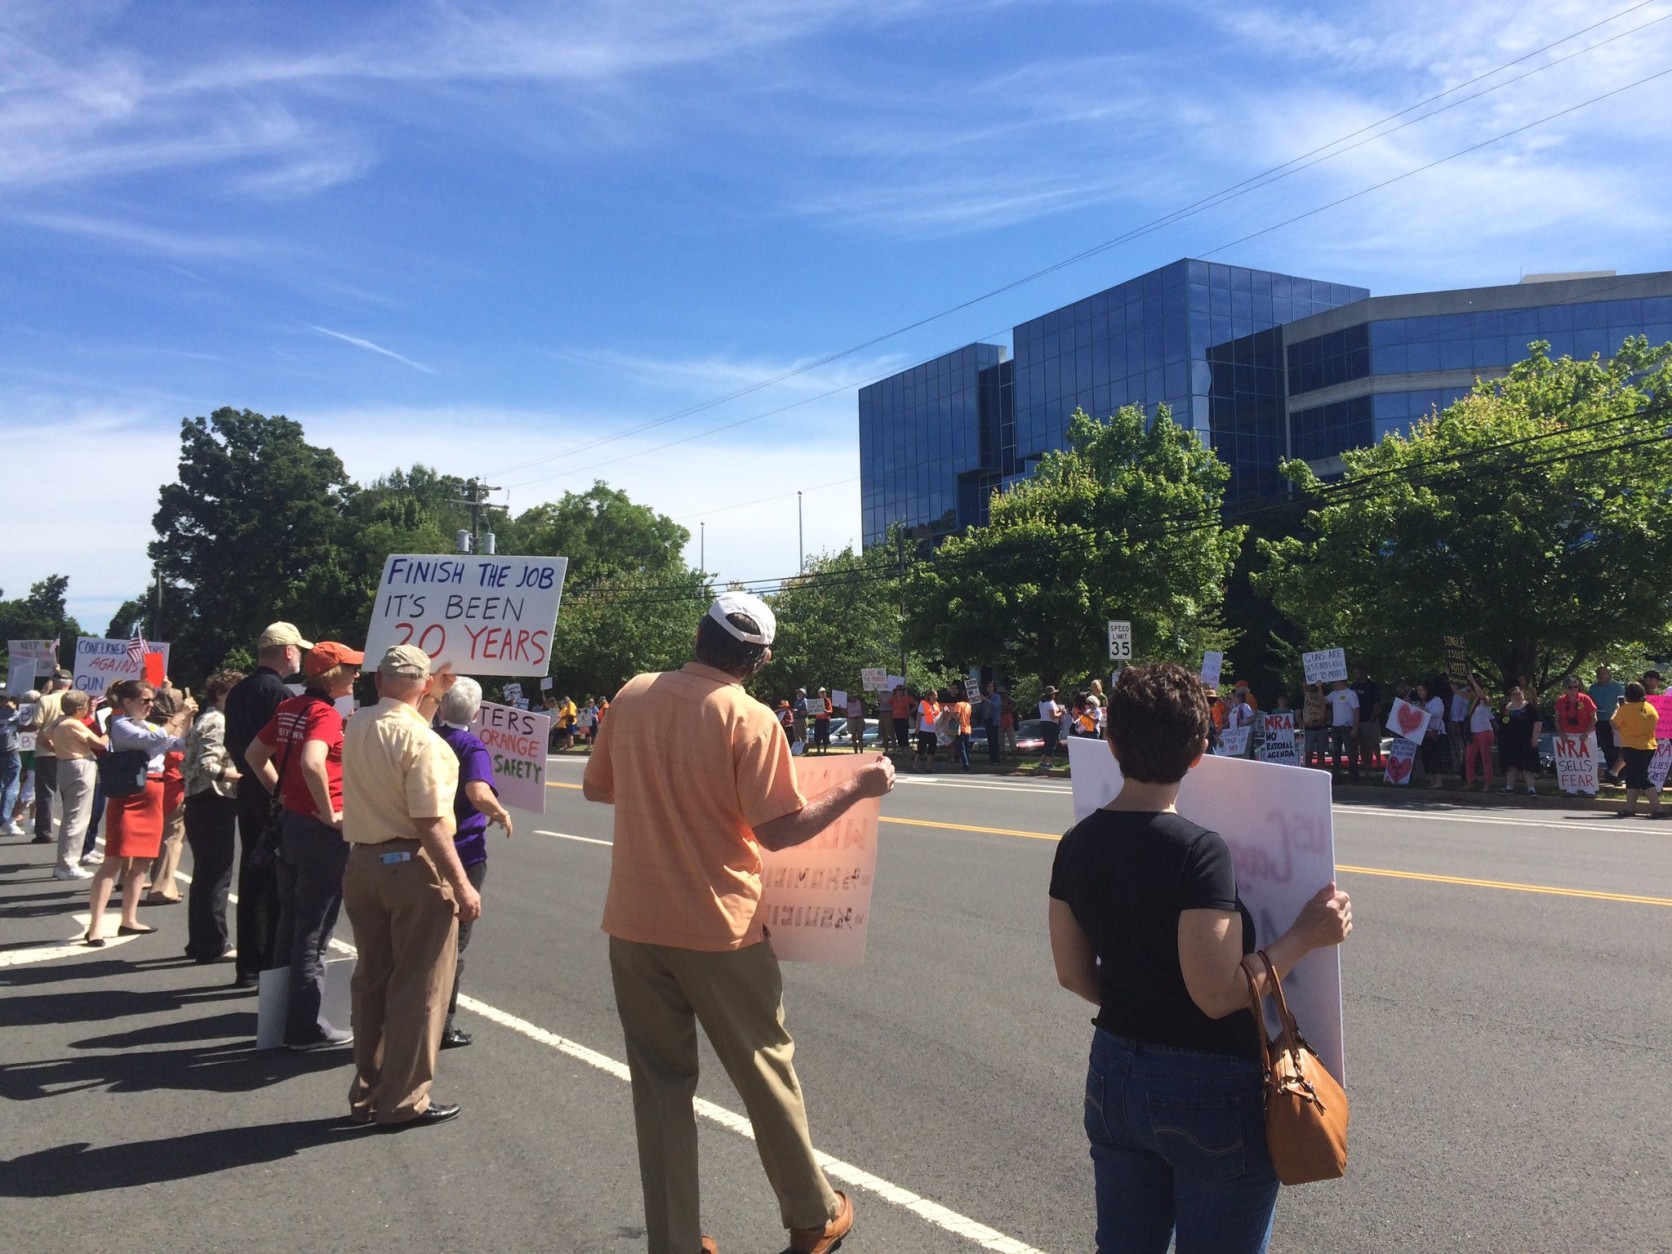 Protesters outside NRA headquarters in Fairfax, Virginia, call for gun control laws. (WTOP/Nick Iannelli)